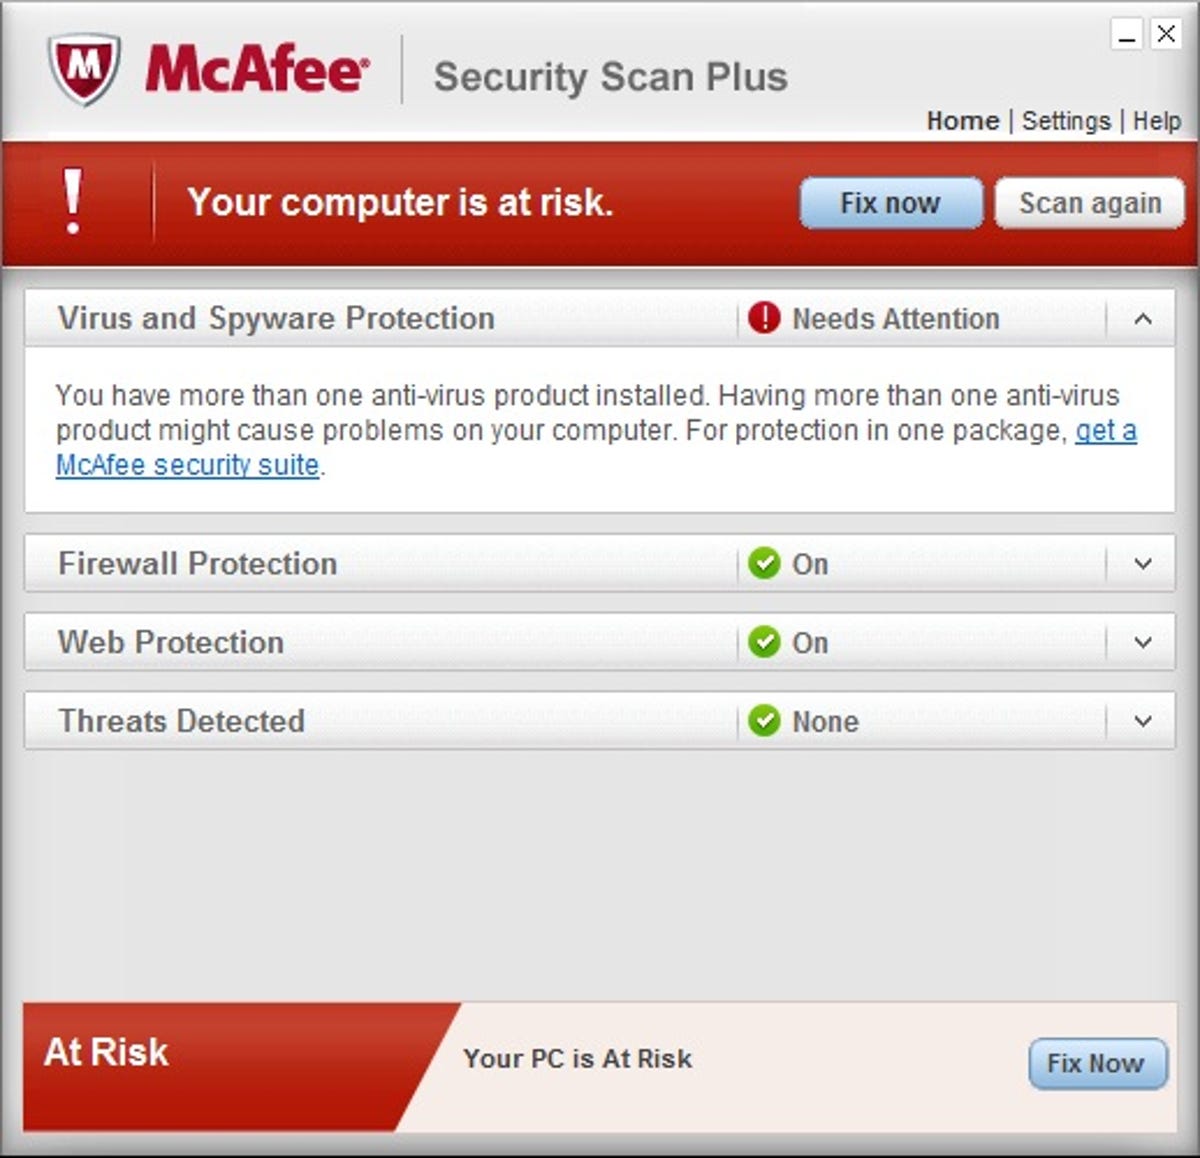 McAfee Security Scan Plus warning pop-up